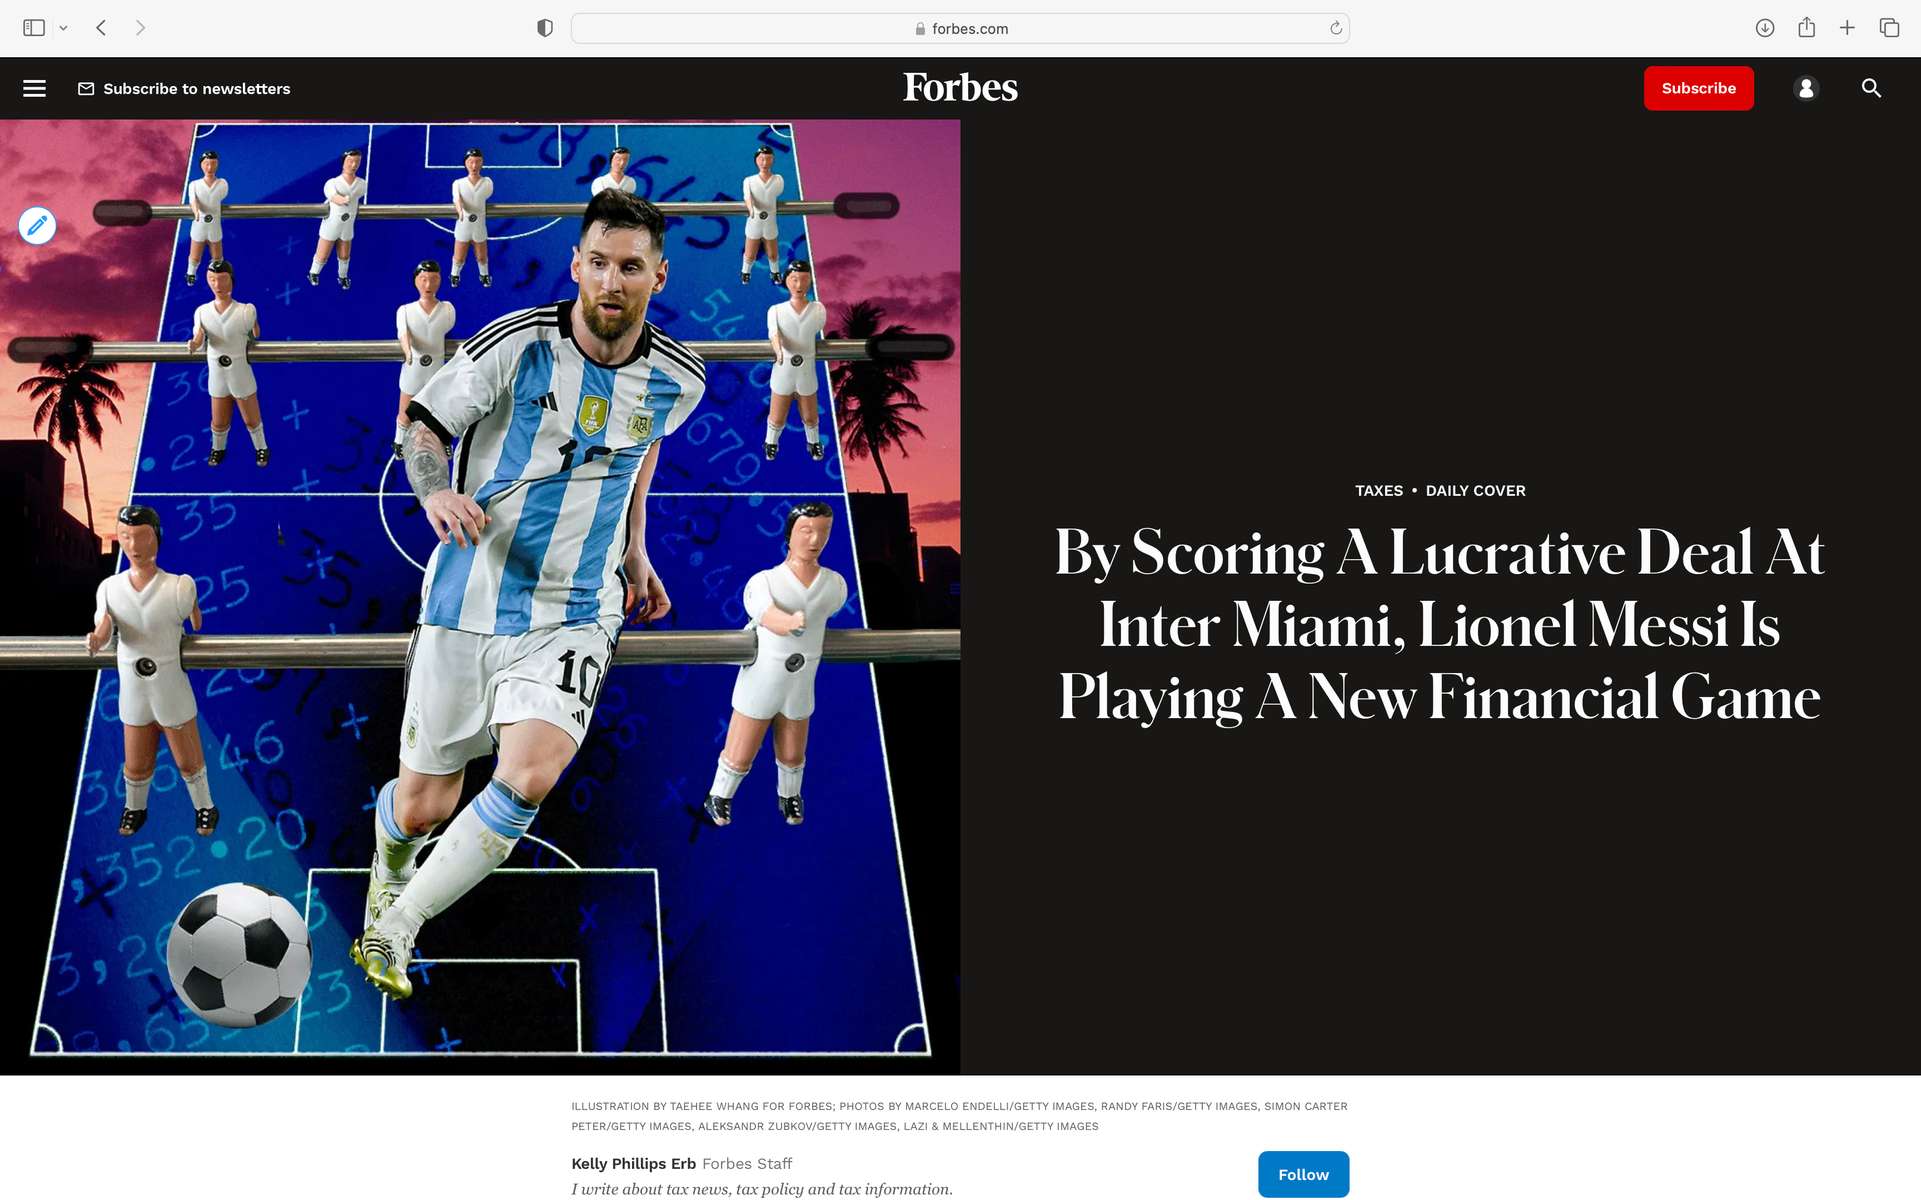 Lionel Messi moves to Miami  |  Photo research + edit for Forbes, 2023